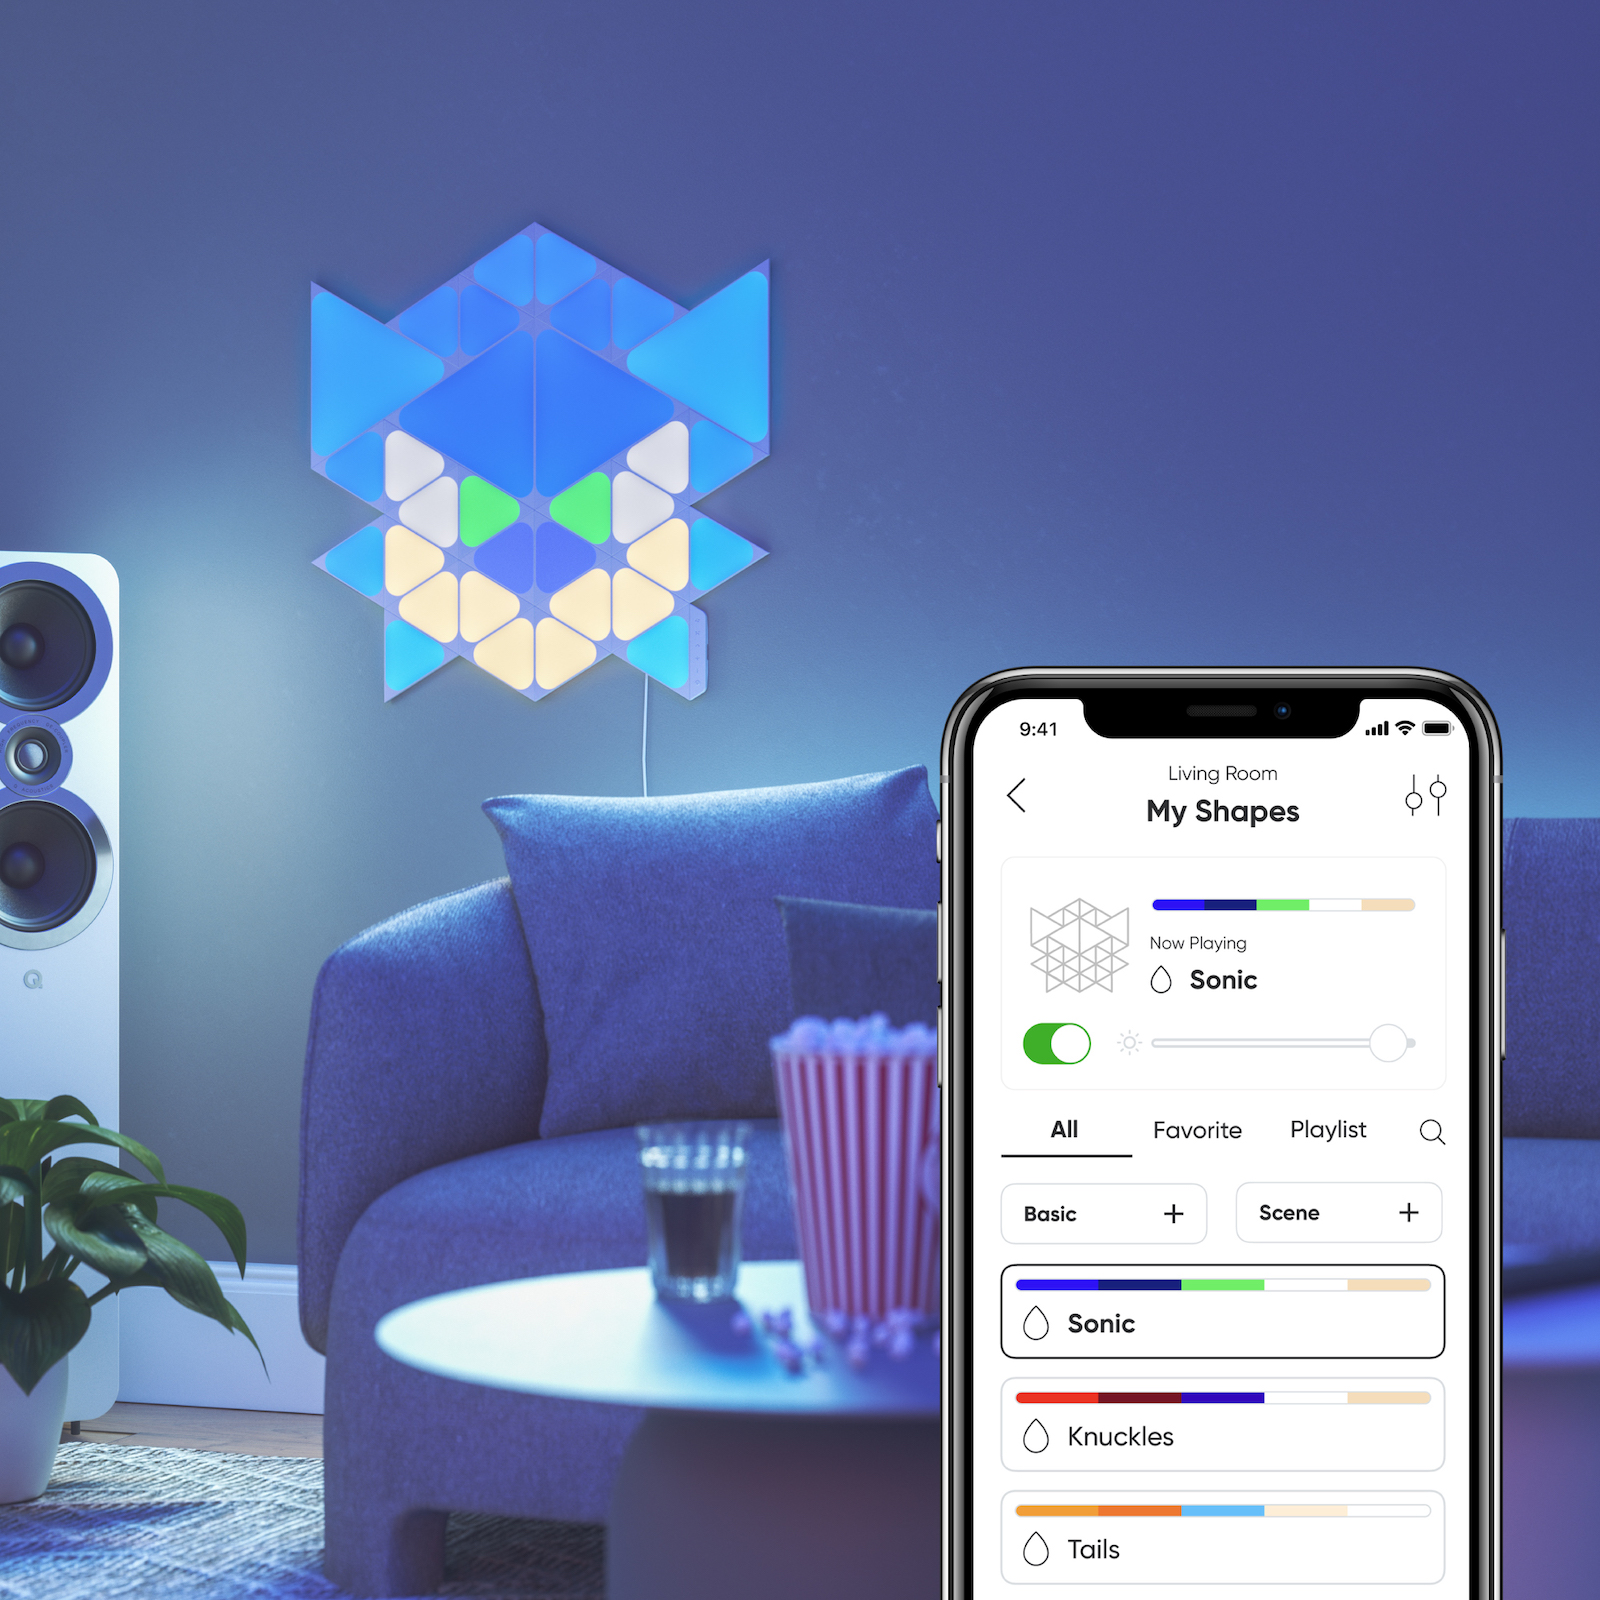 Nanoleaf Shapes Thread enabled color changing triangle and mini triangle smart modular light panels mounted to a wall in a living room as Sonic. Sonic the Hedgehog 2. Ứng dụng Nanoleaf. Tương tự với Philips Hue, Lifx. HomeKit, Trợ lý Google, Amazon Alexa, IFTTT.